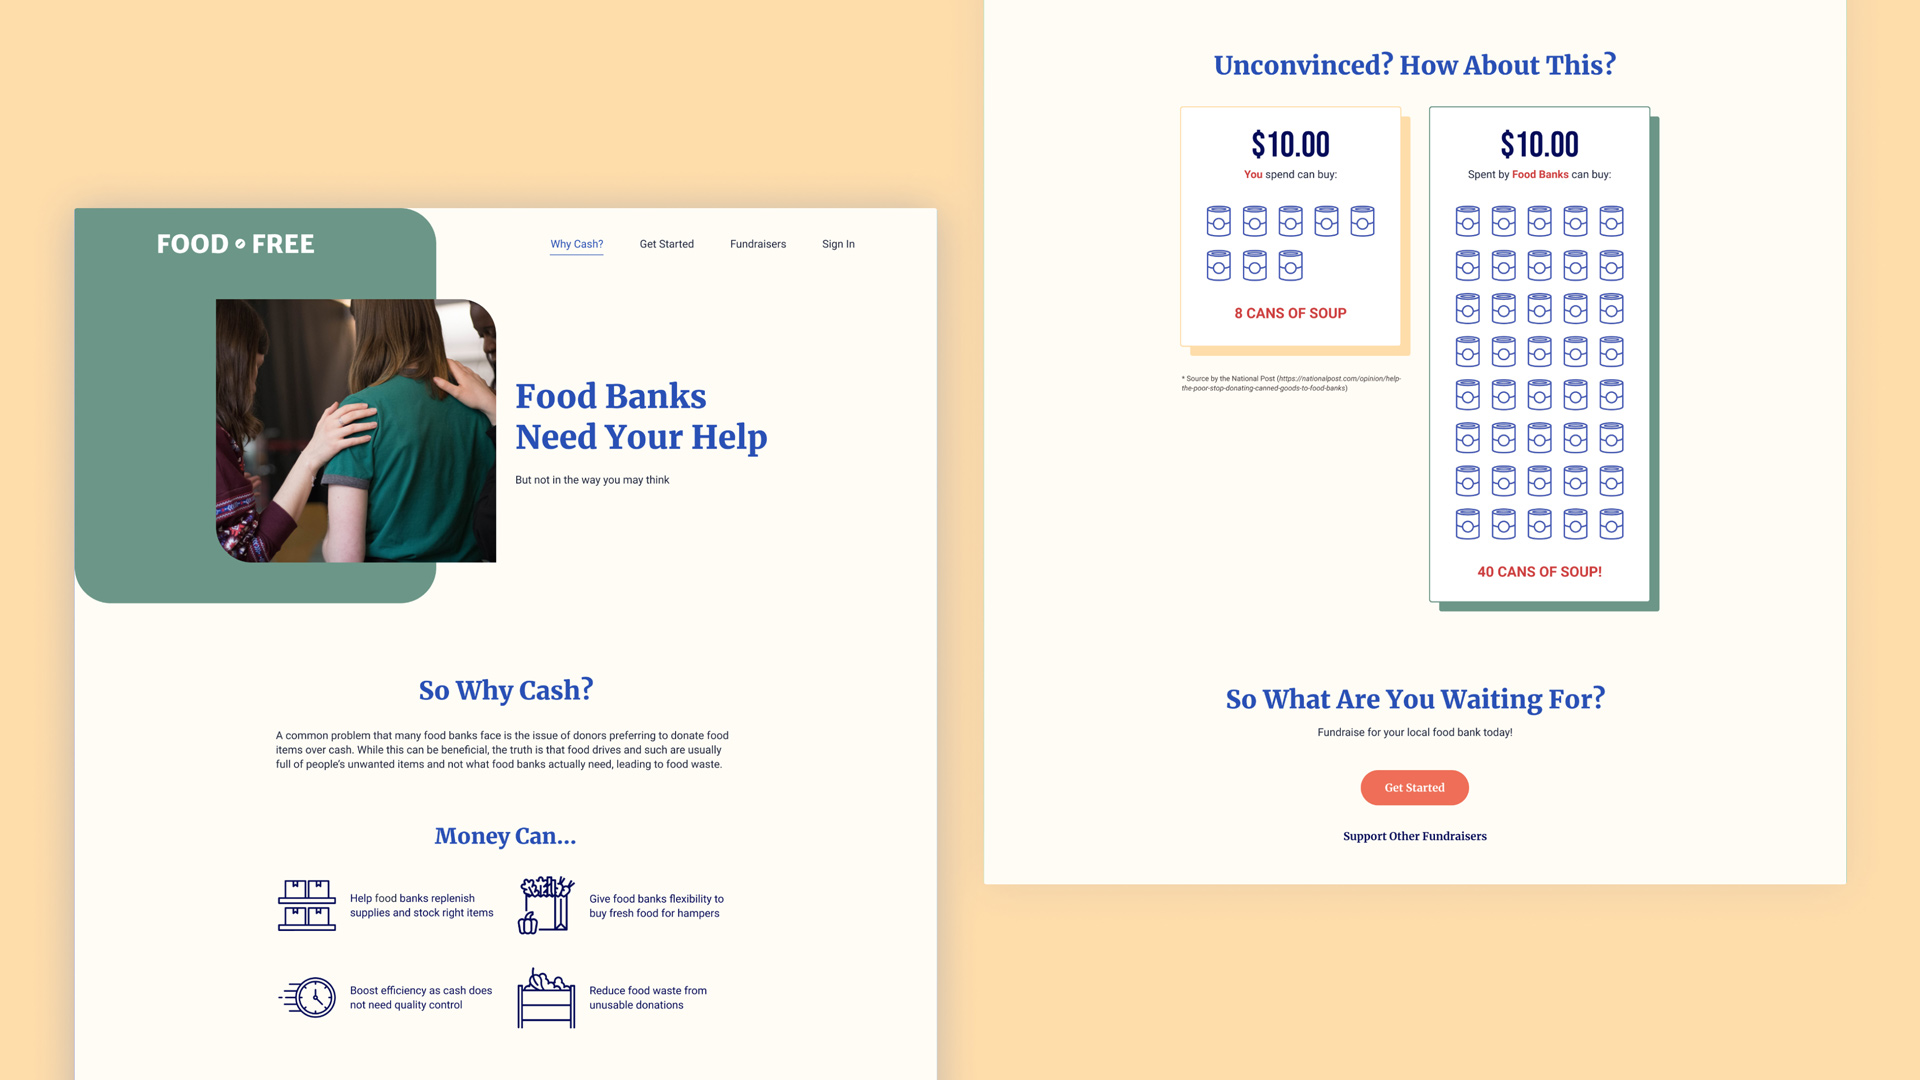 Website mockups of Food • Free’s “Why Cash?” page that uses information design to educate visitors on how they can help reduce waste in food banks.